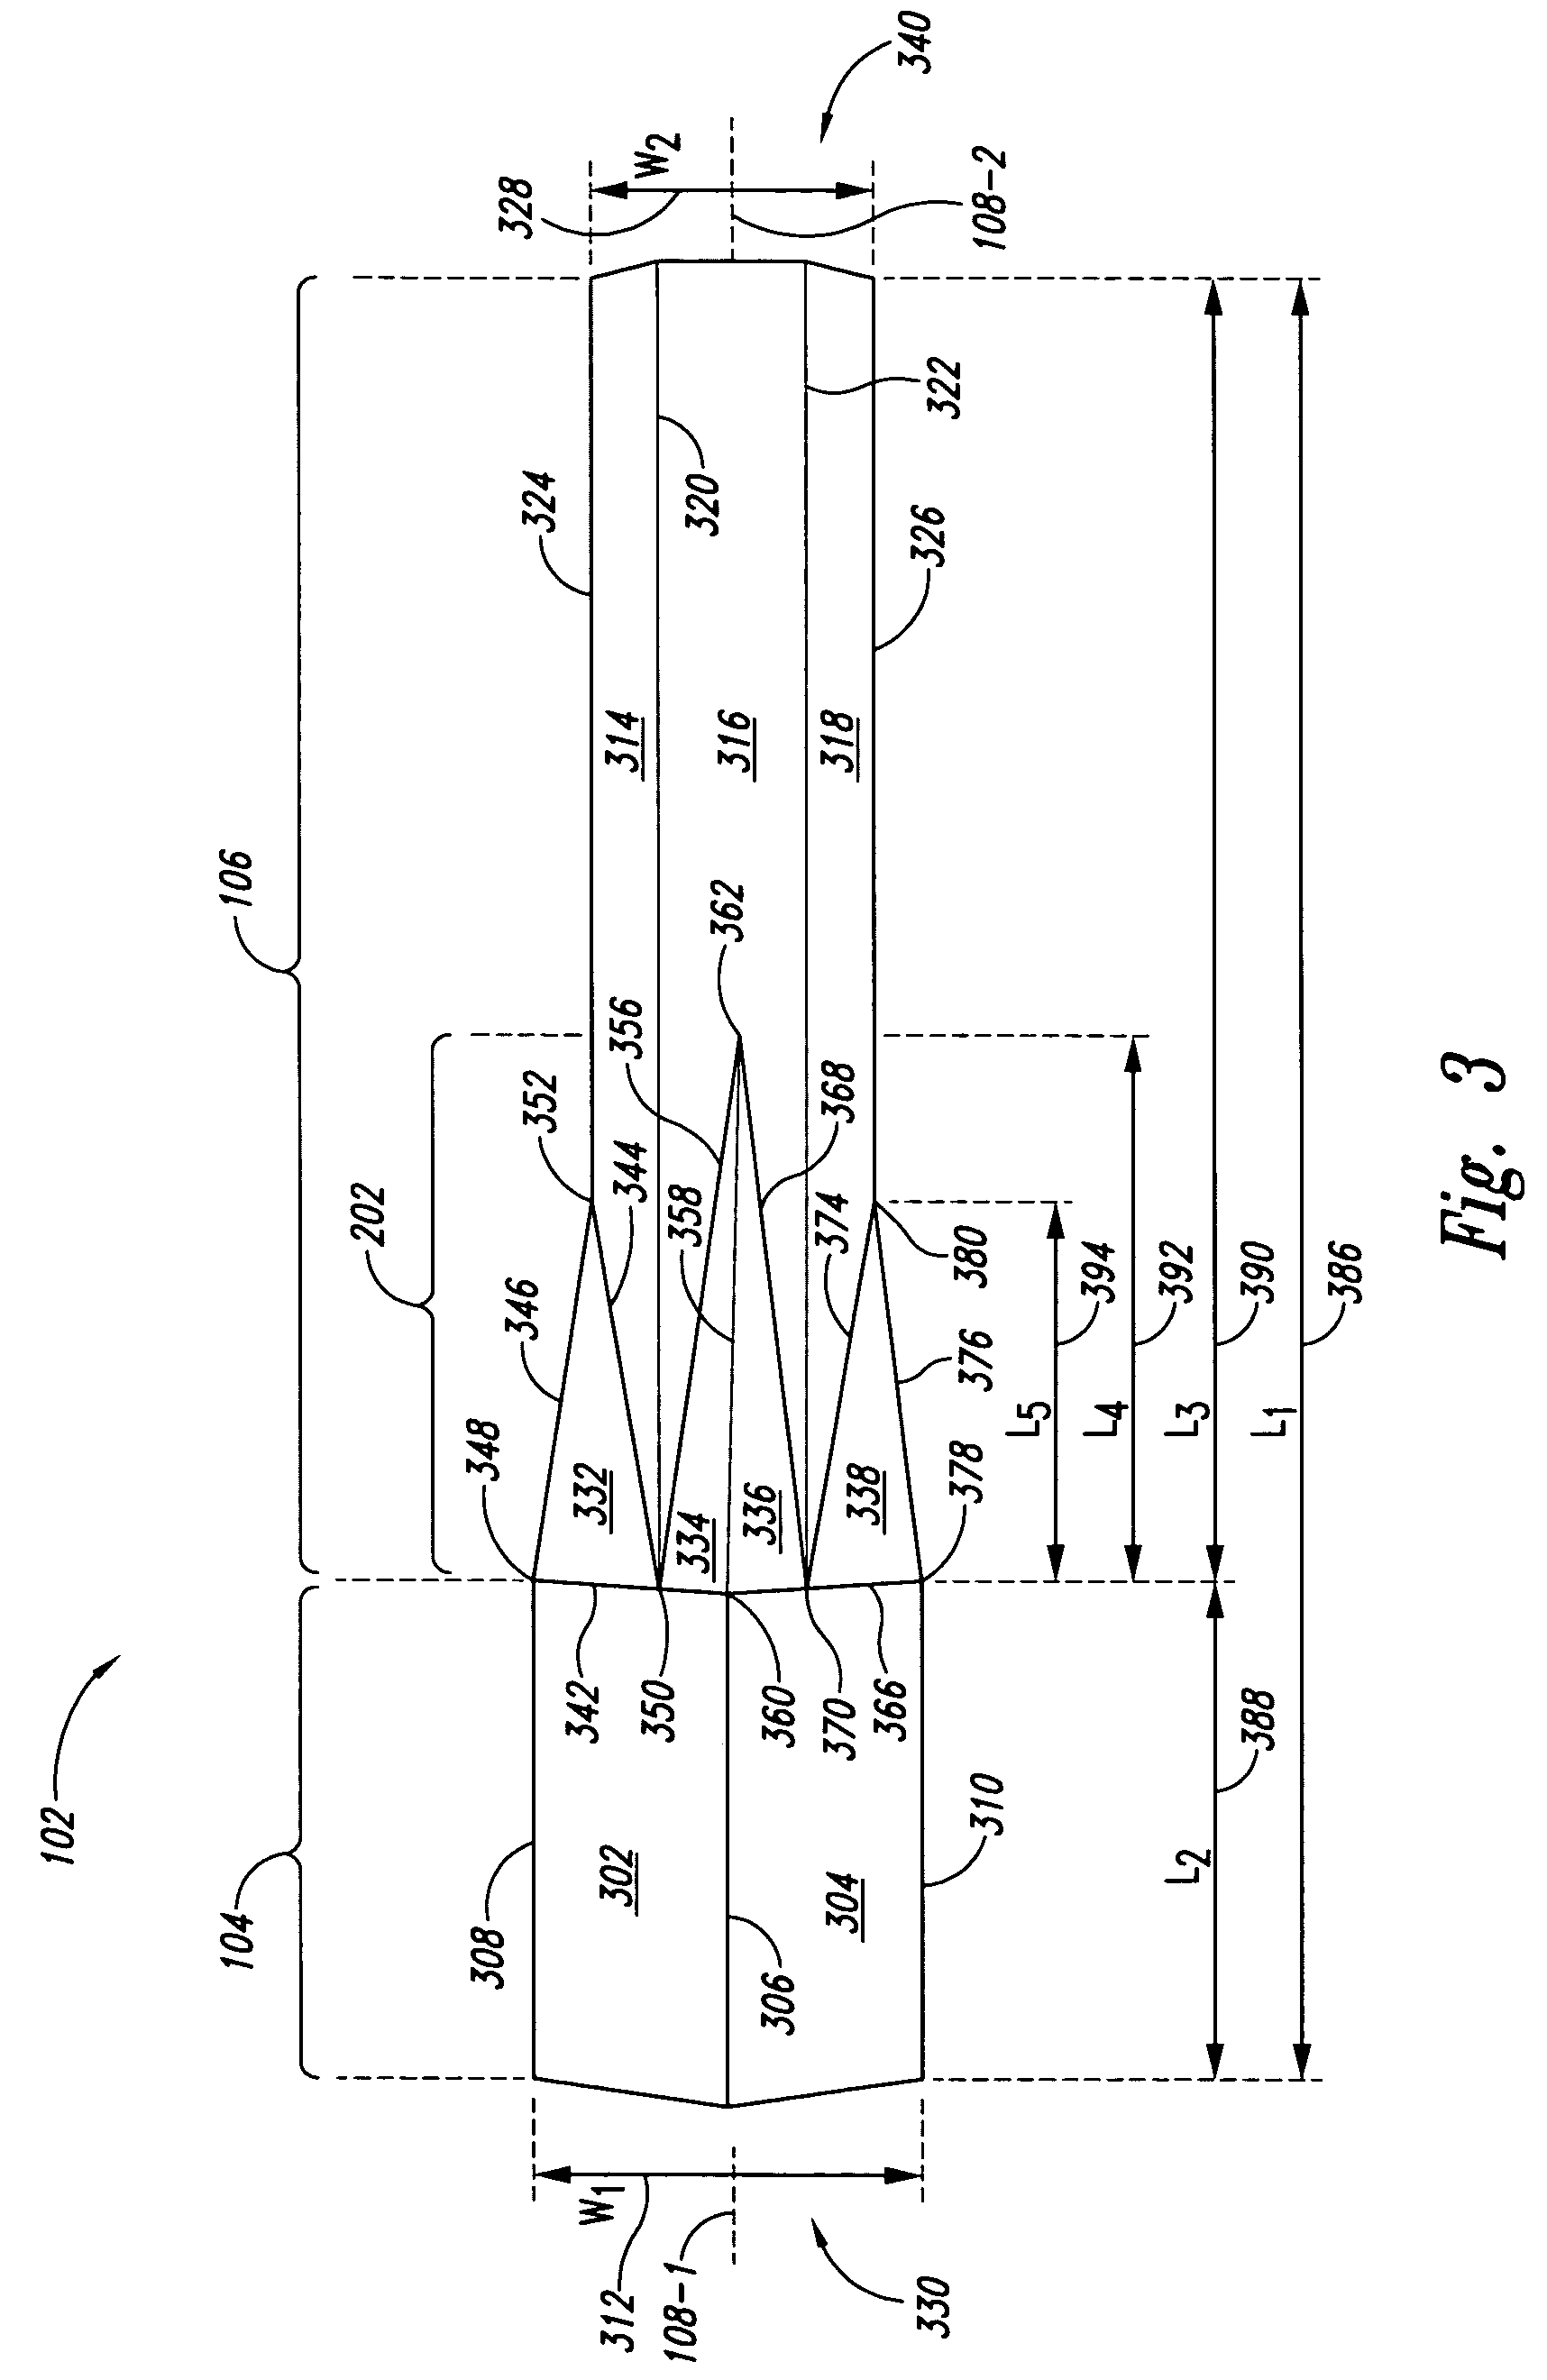 Light mixing and homogenizing apparatus and method